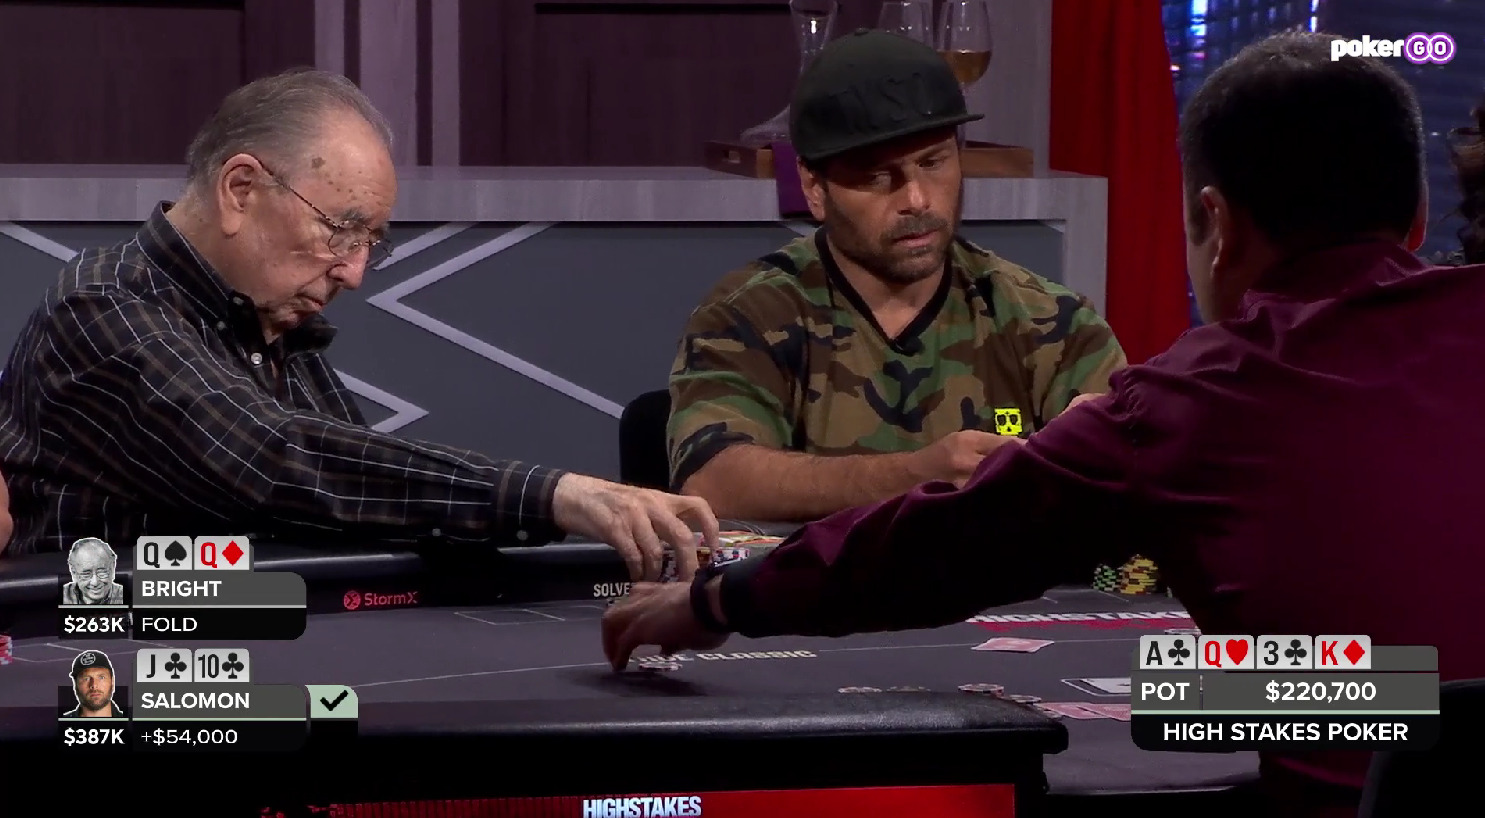 High Stakes Poker - Bob Bright Folds Two Sets And Is Right!1